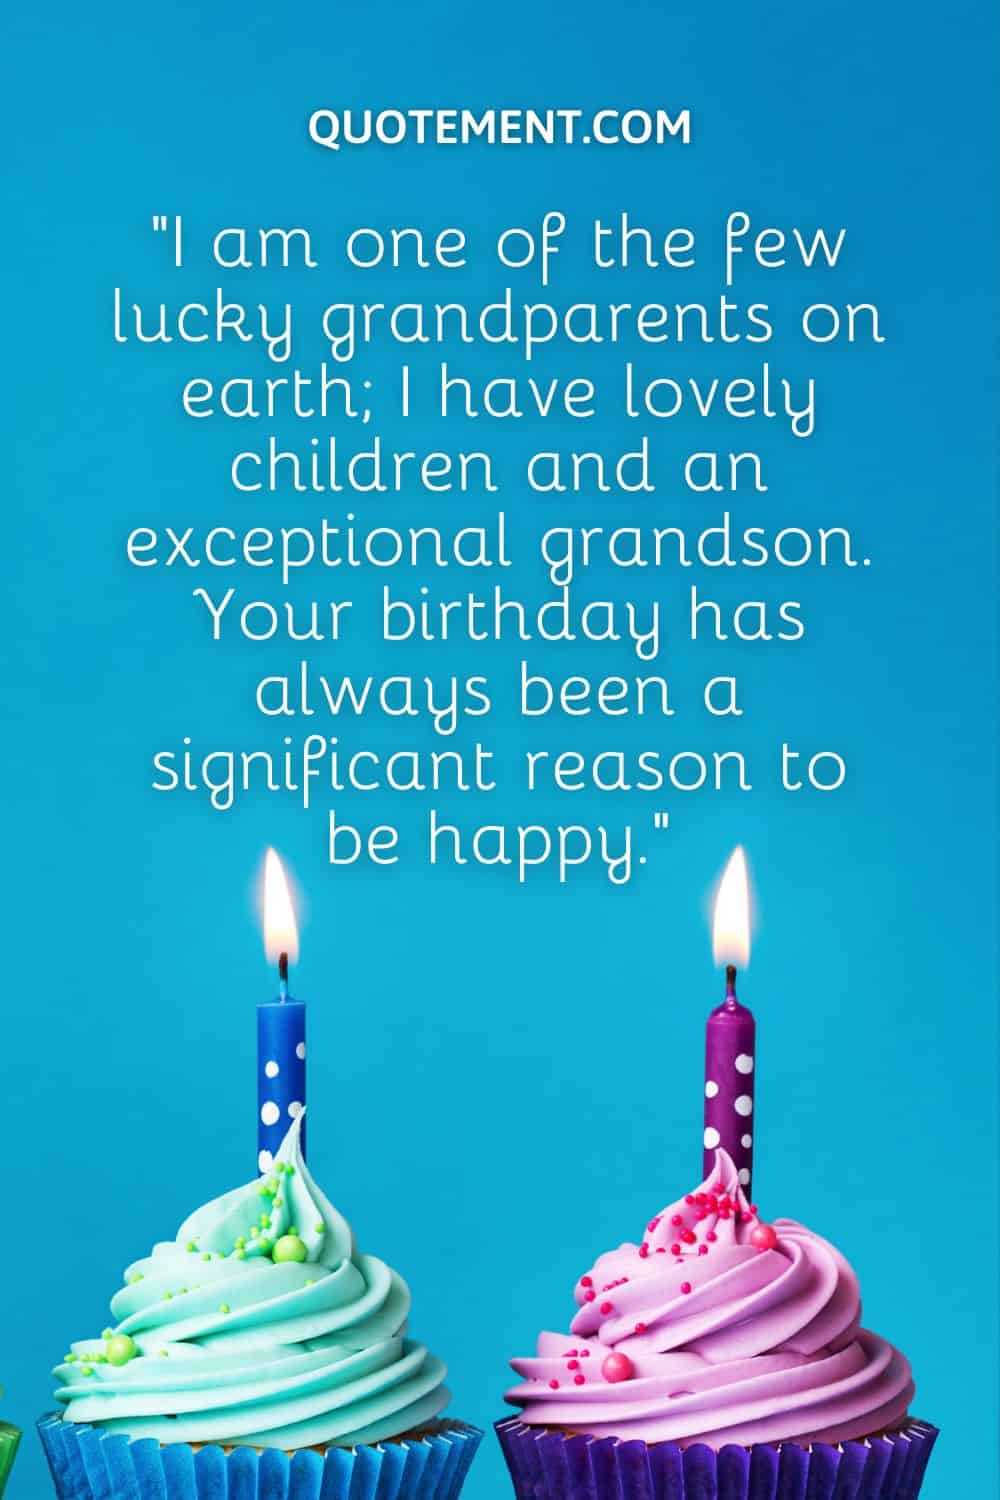 “I am one of the few lucky grandparents on earth; I have lovely children and an exceptional grandson. Your birthday has always been a significant reason to be happy.”